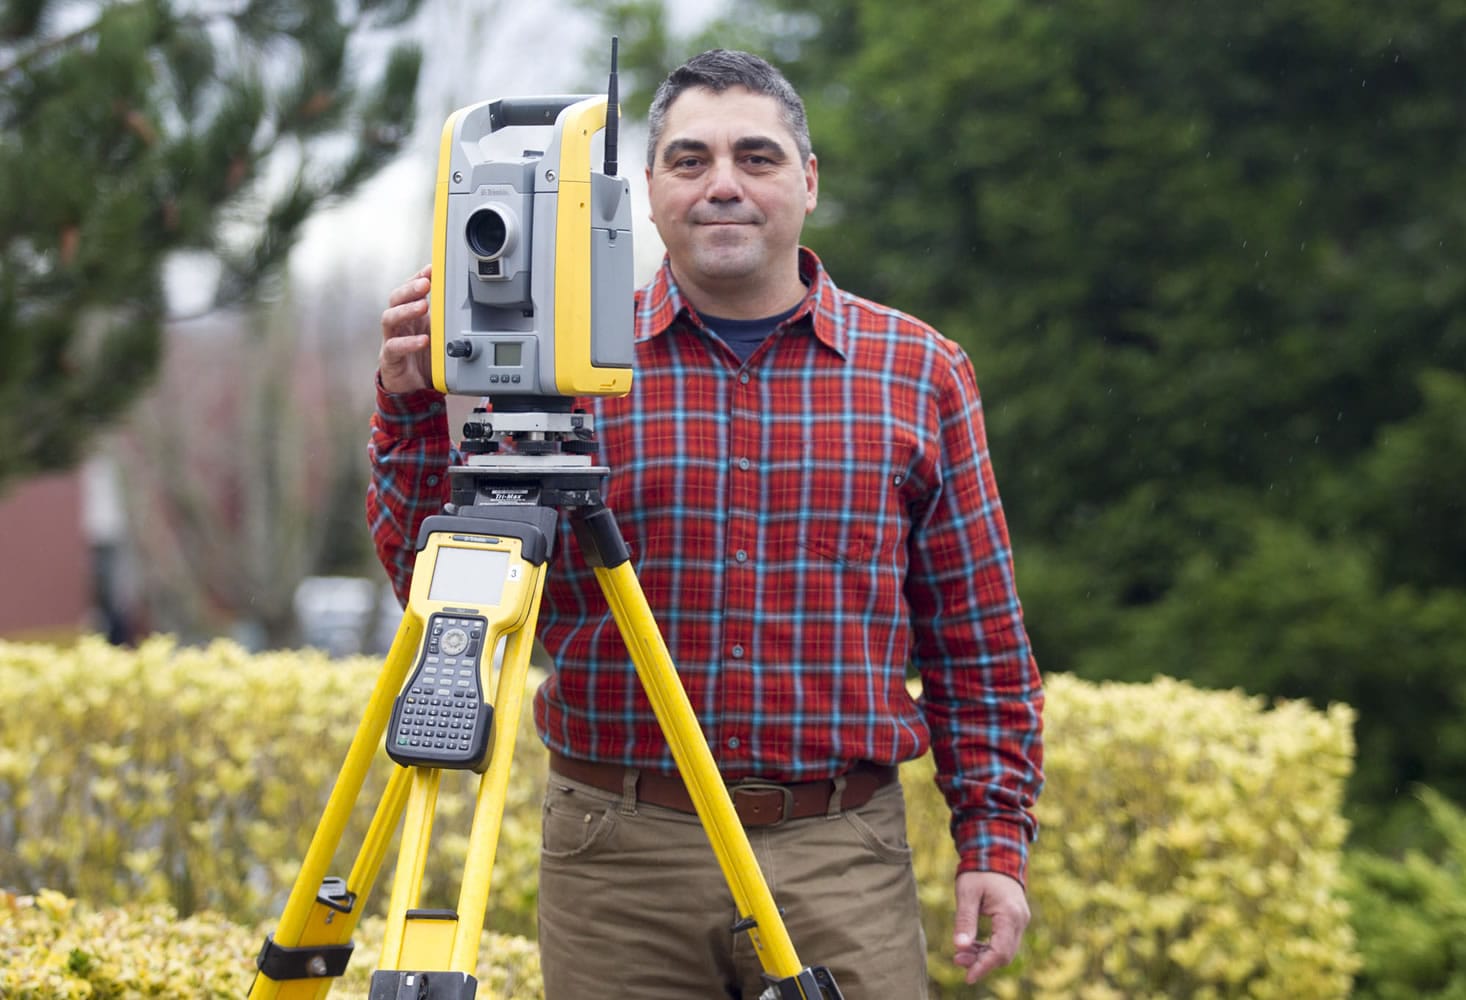 Vancouver resident Frank Costanza has been a land survey technician at Mackay Esposito for 13 years.